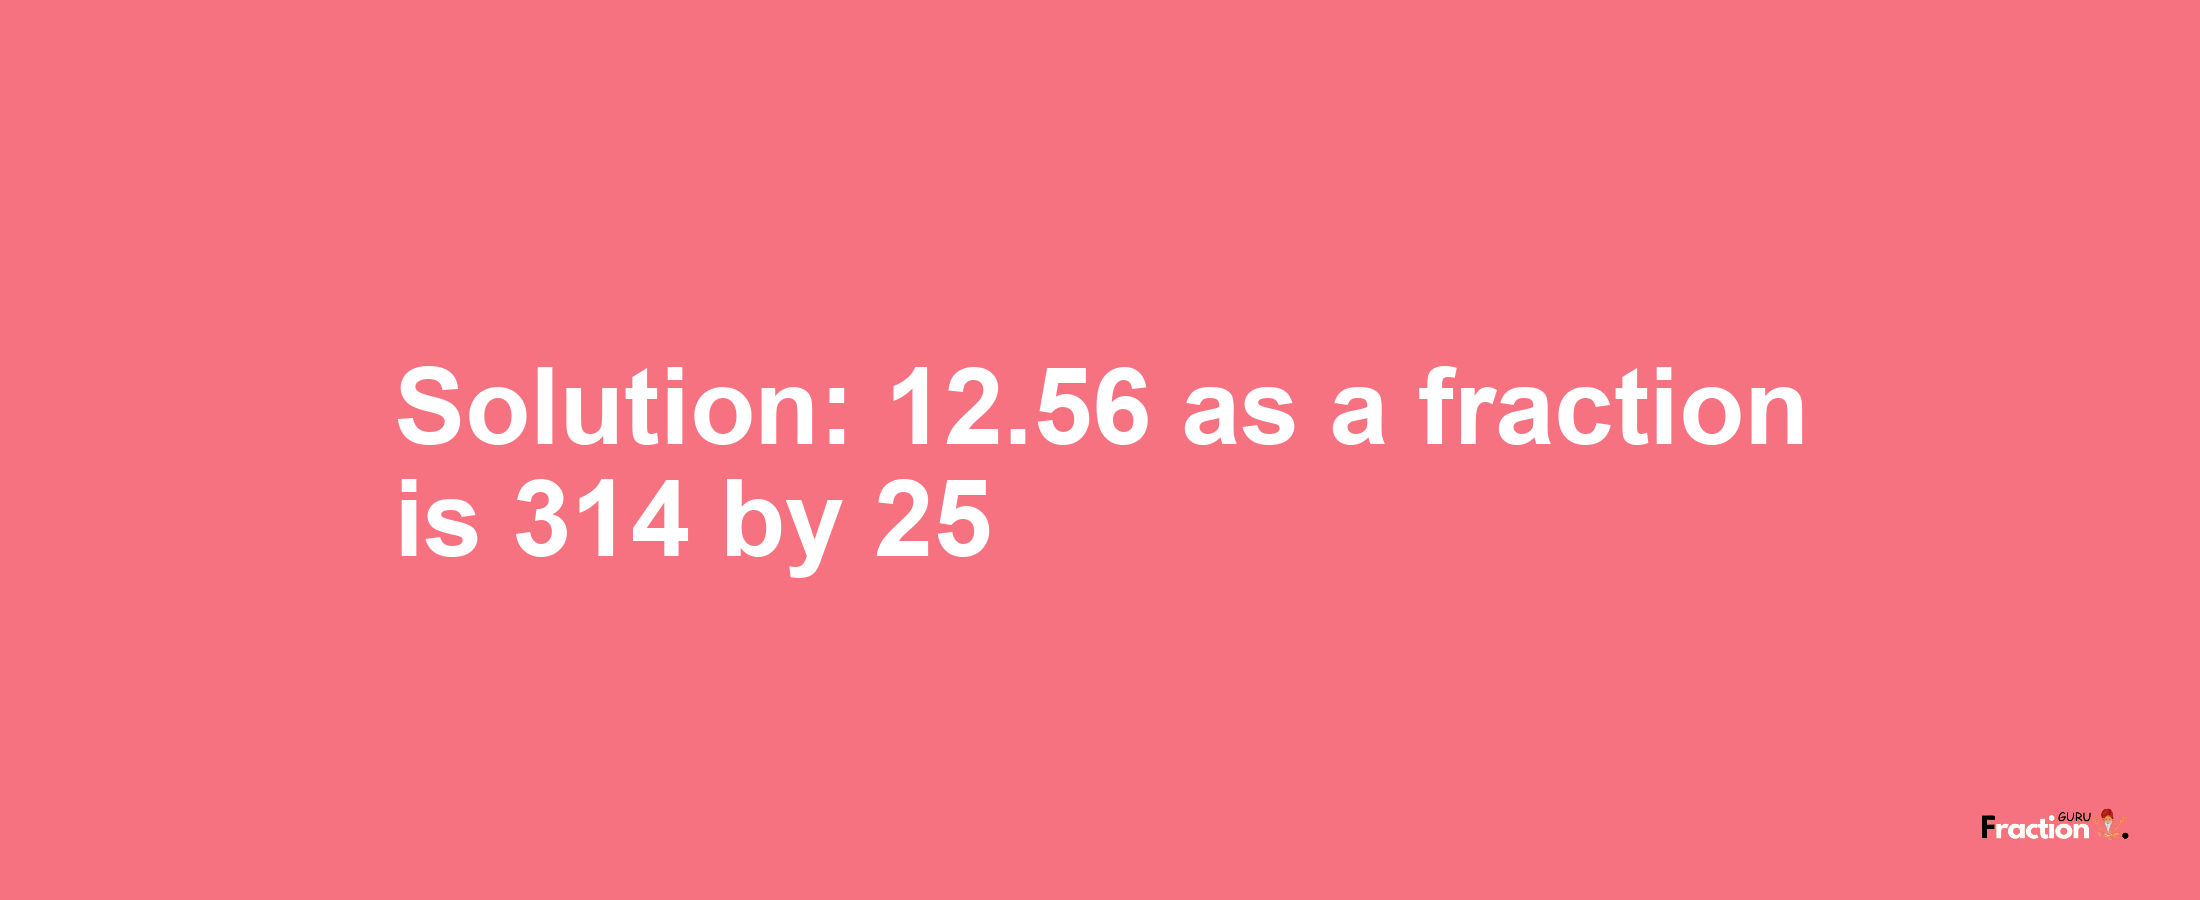 Solution:12.56 as a fraction is 314/25